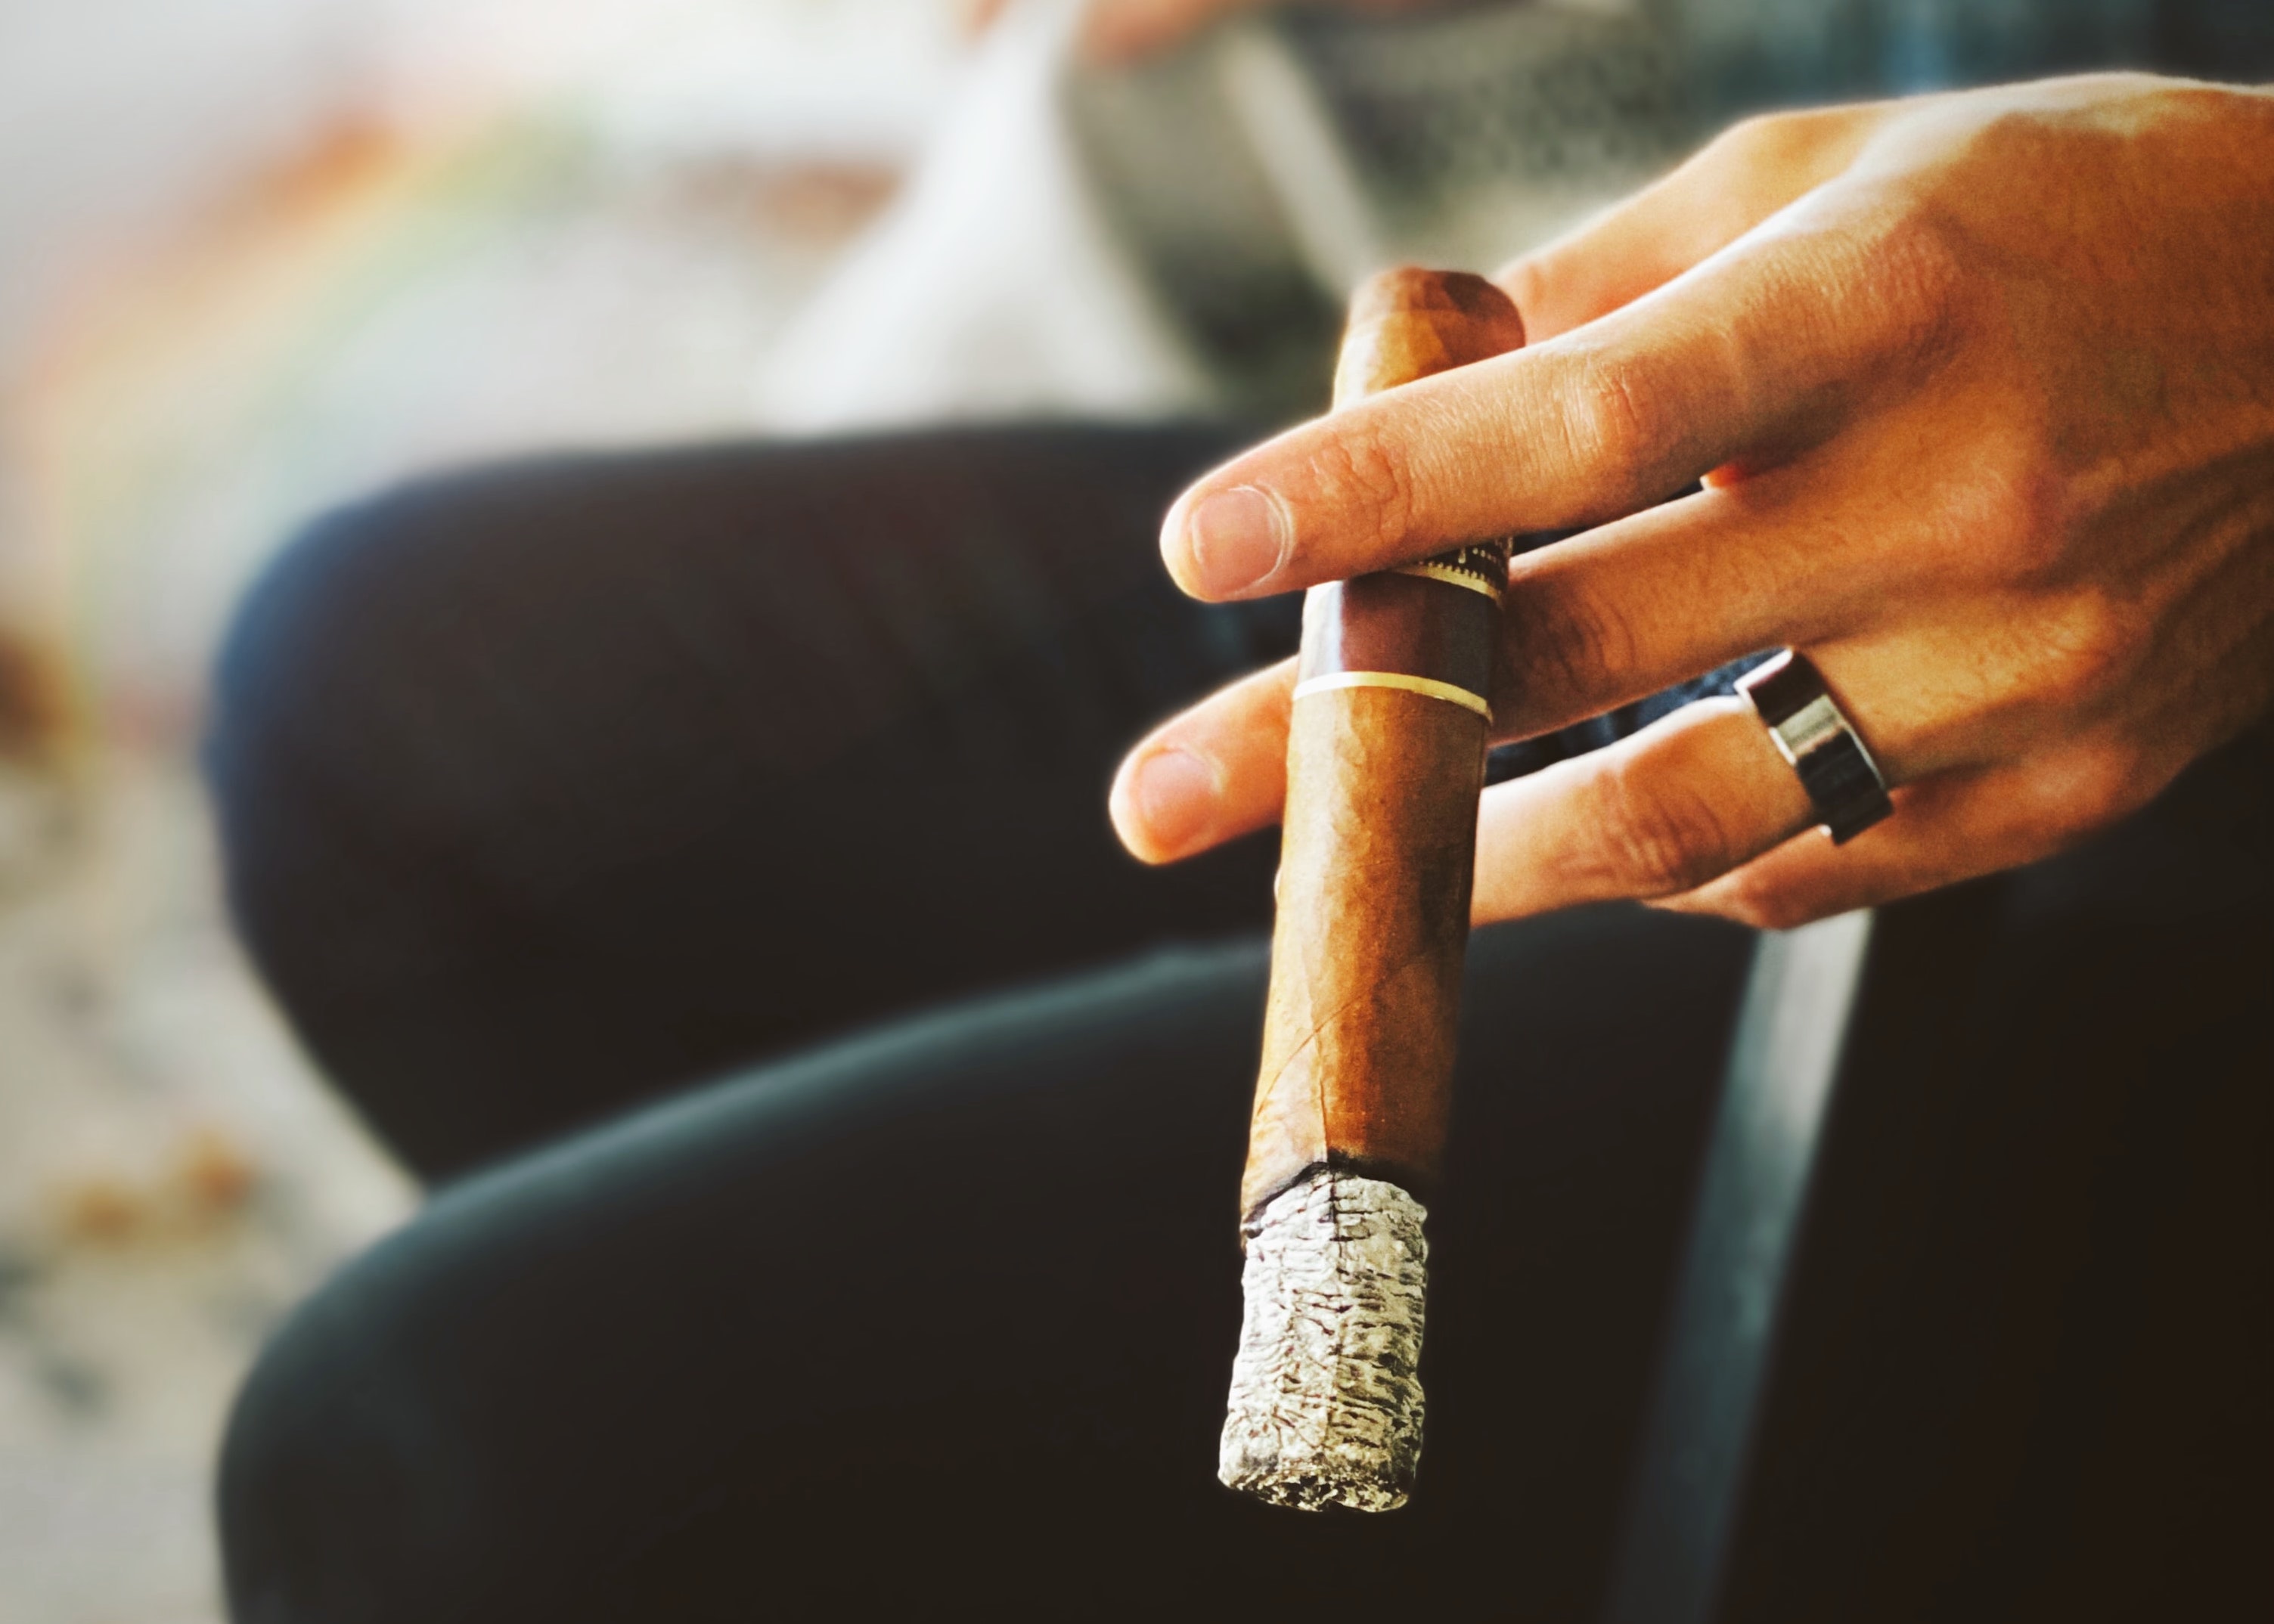 A cigar being held while smoked